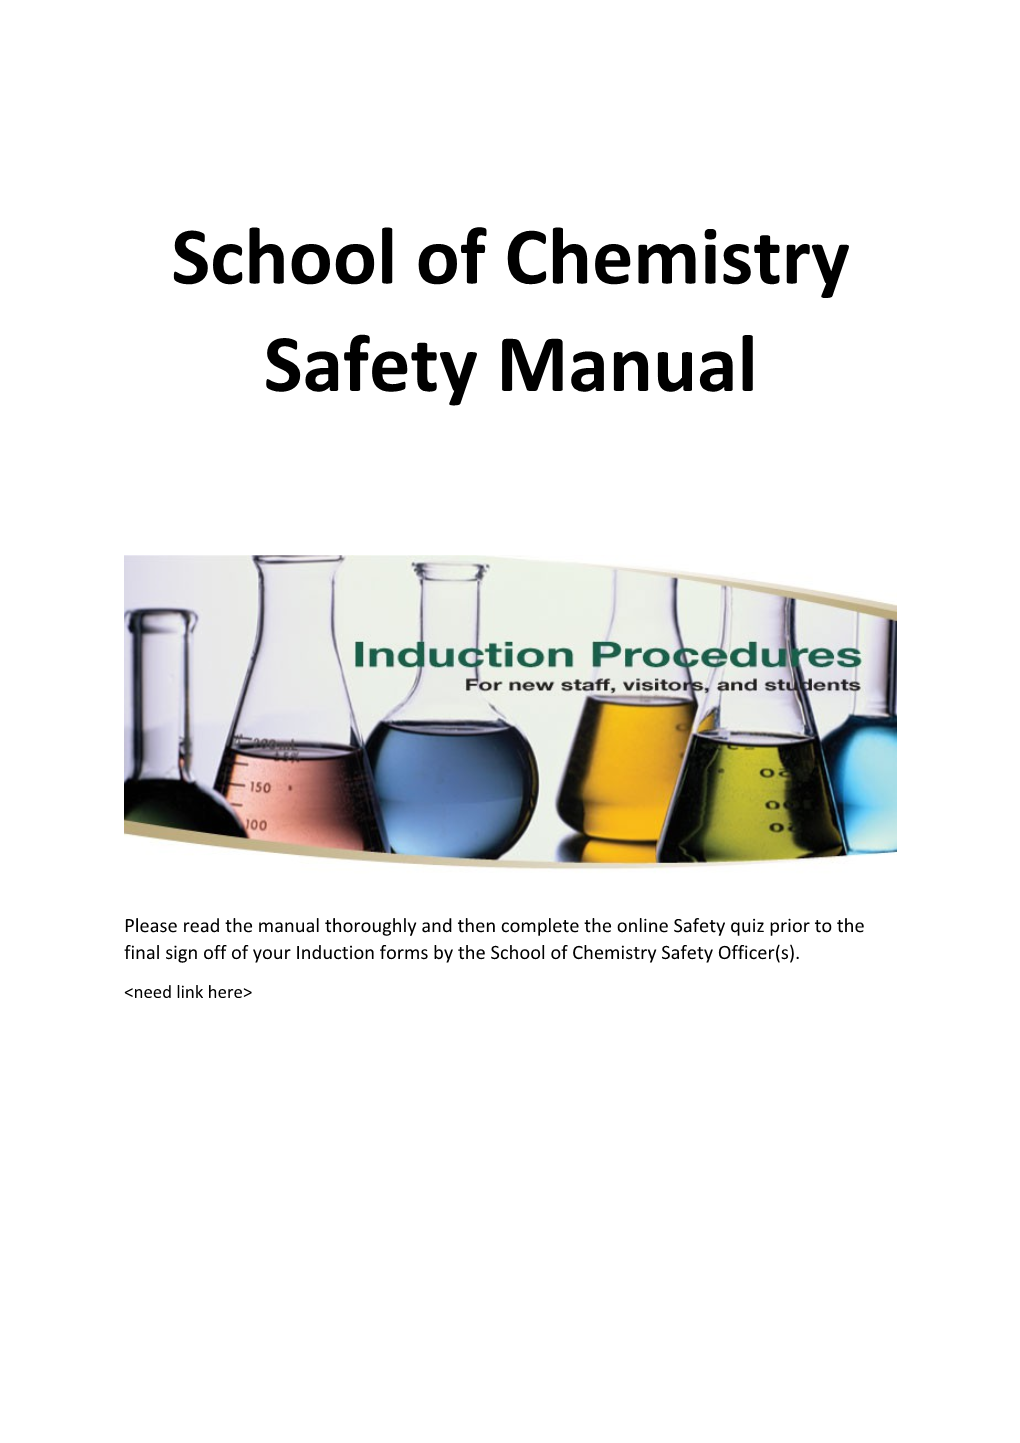 School of Chemistry Safety Manual